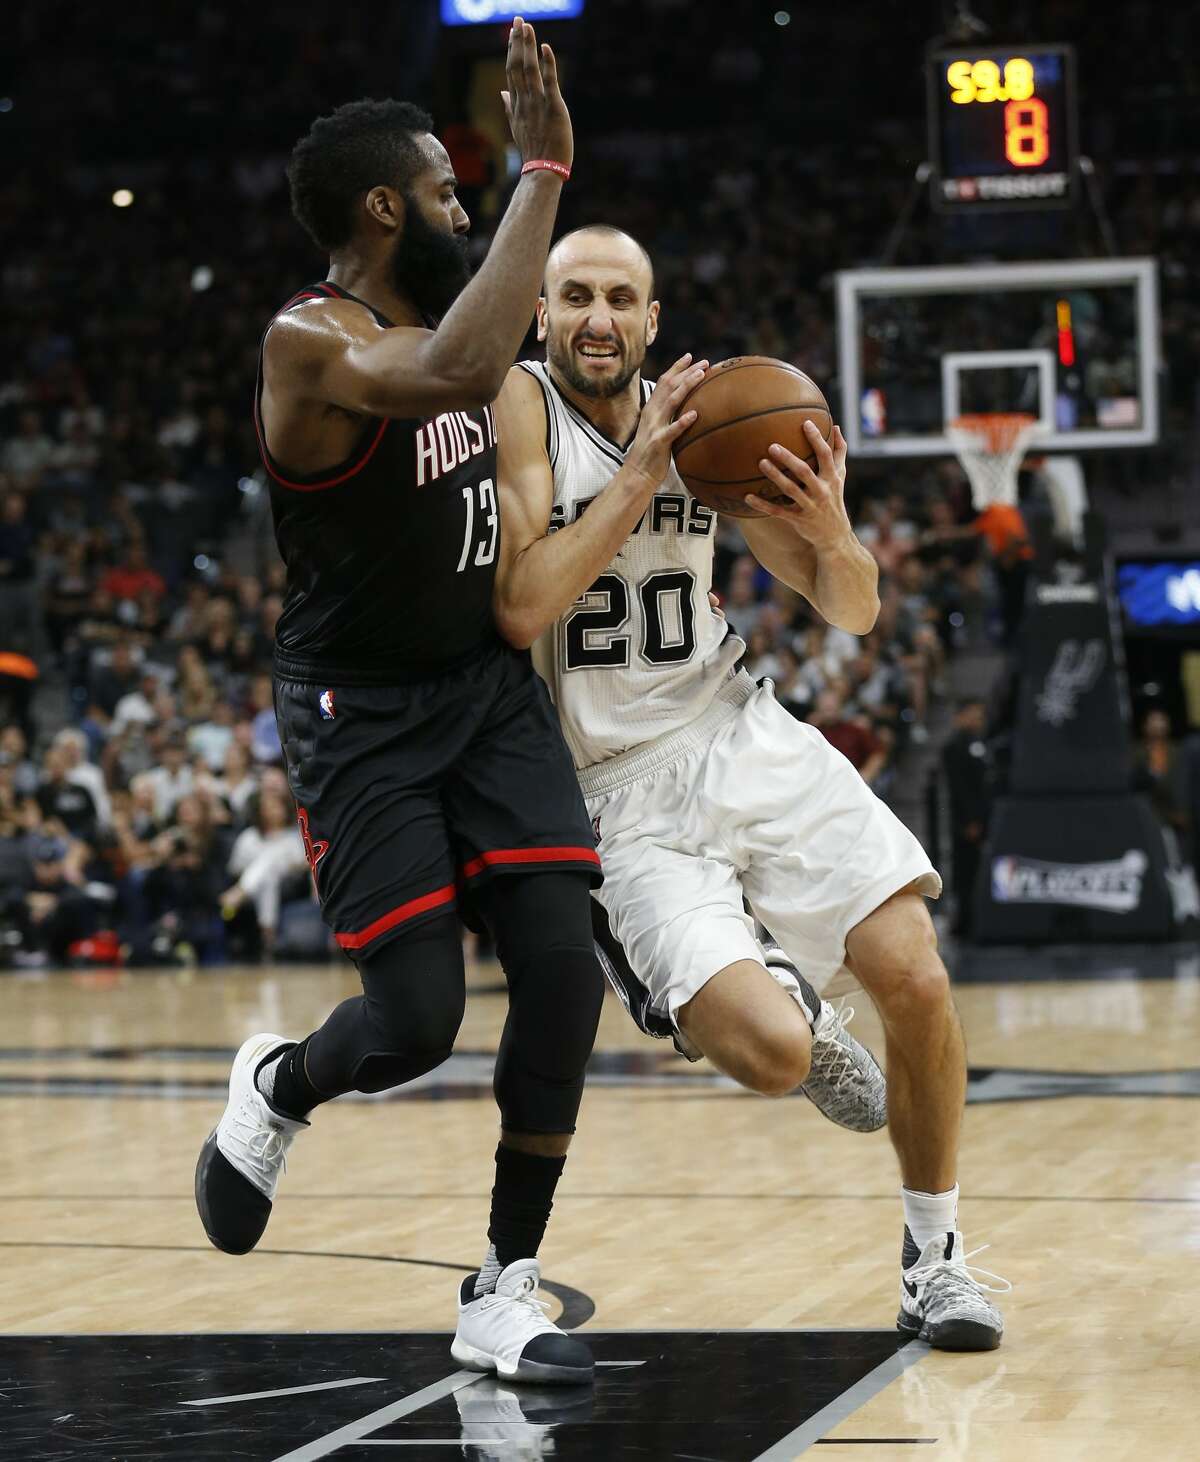 Spurs' Manu Ginobili (20) drives on Houston Rockets' James Harden (13) in Game 5 of the Western Conference semifinals at the AT&T Center on Tuesday, May 9, 2017. (Kin Man Hui/San Antonio Express-News)